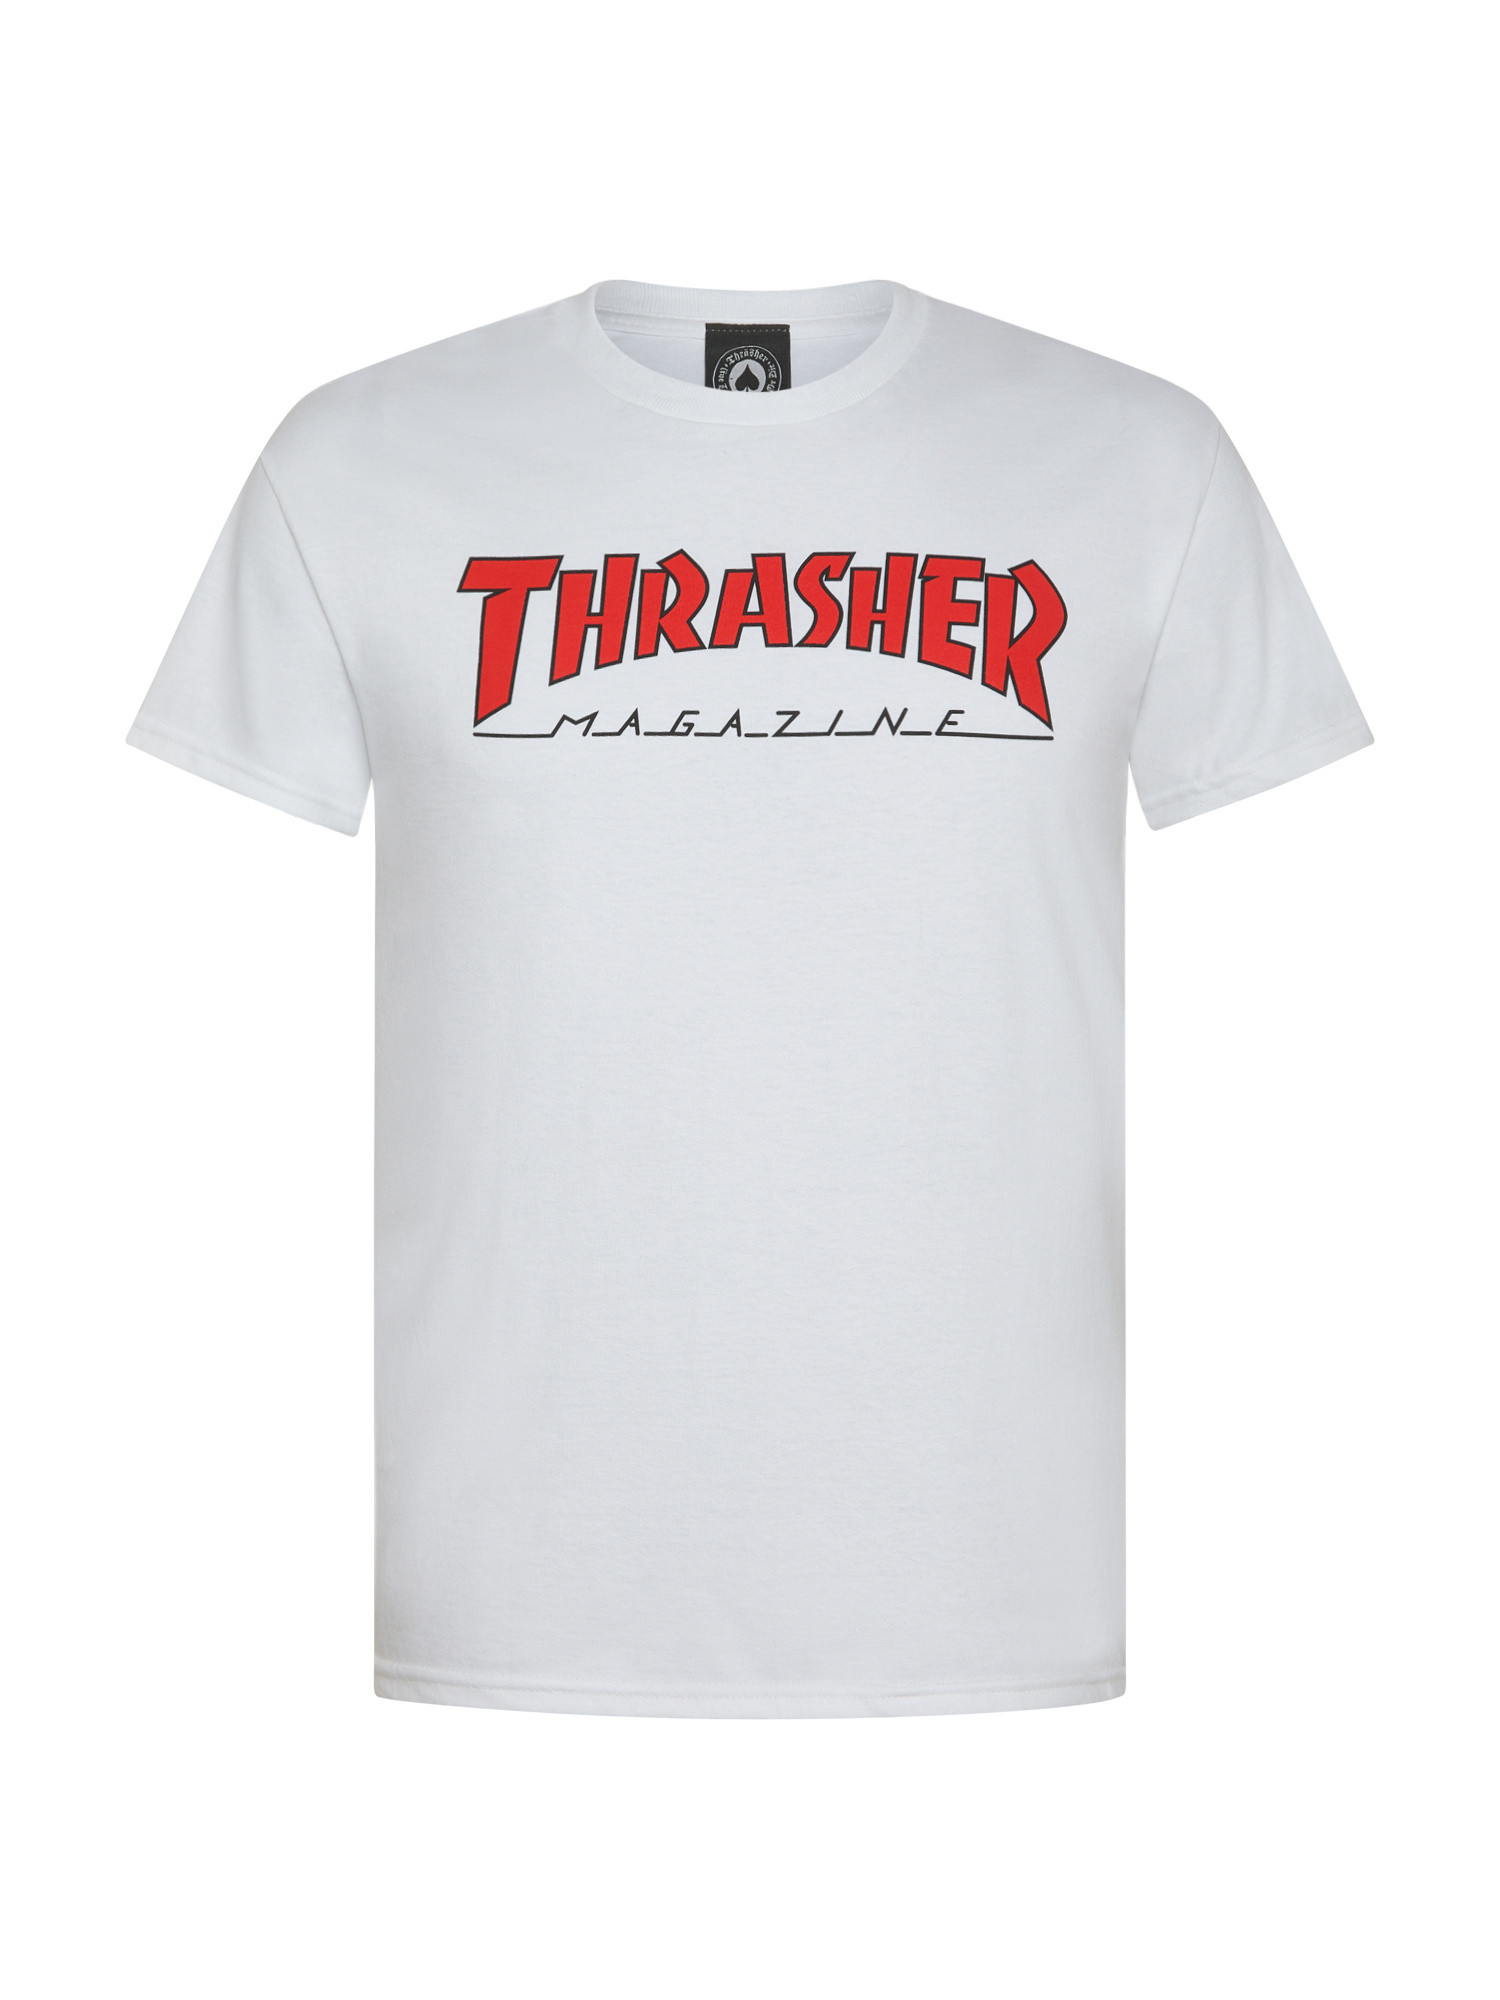 Thrasher - T-Shirt con logo outlined, Bianco, large image number 0